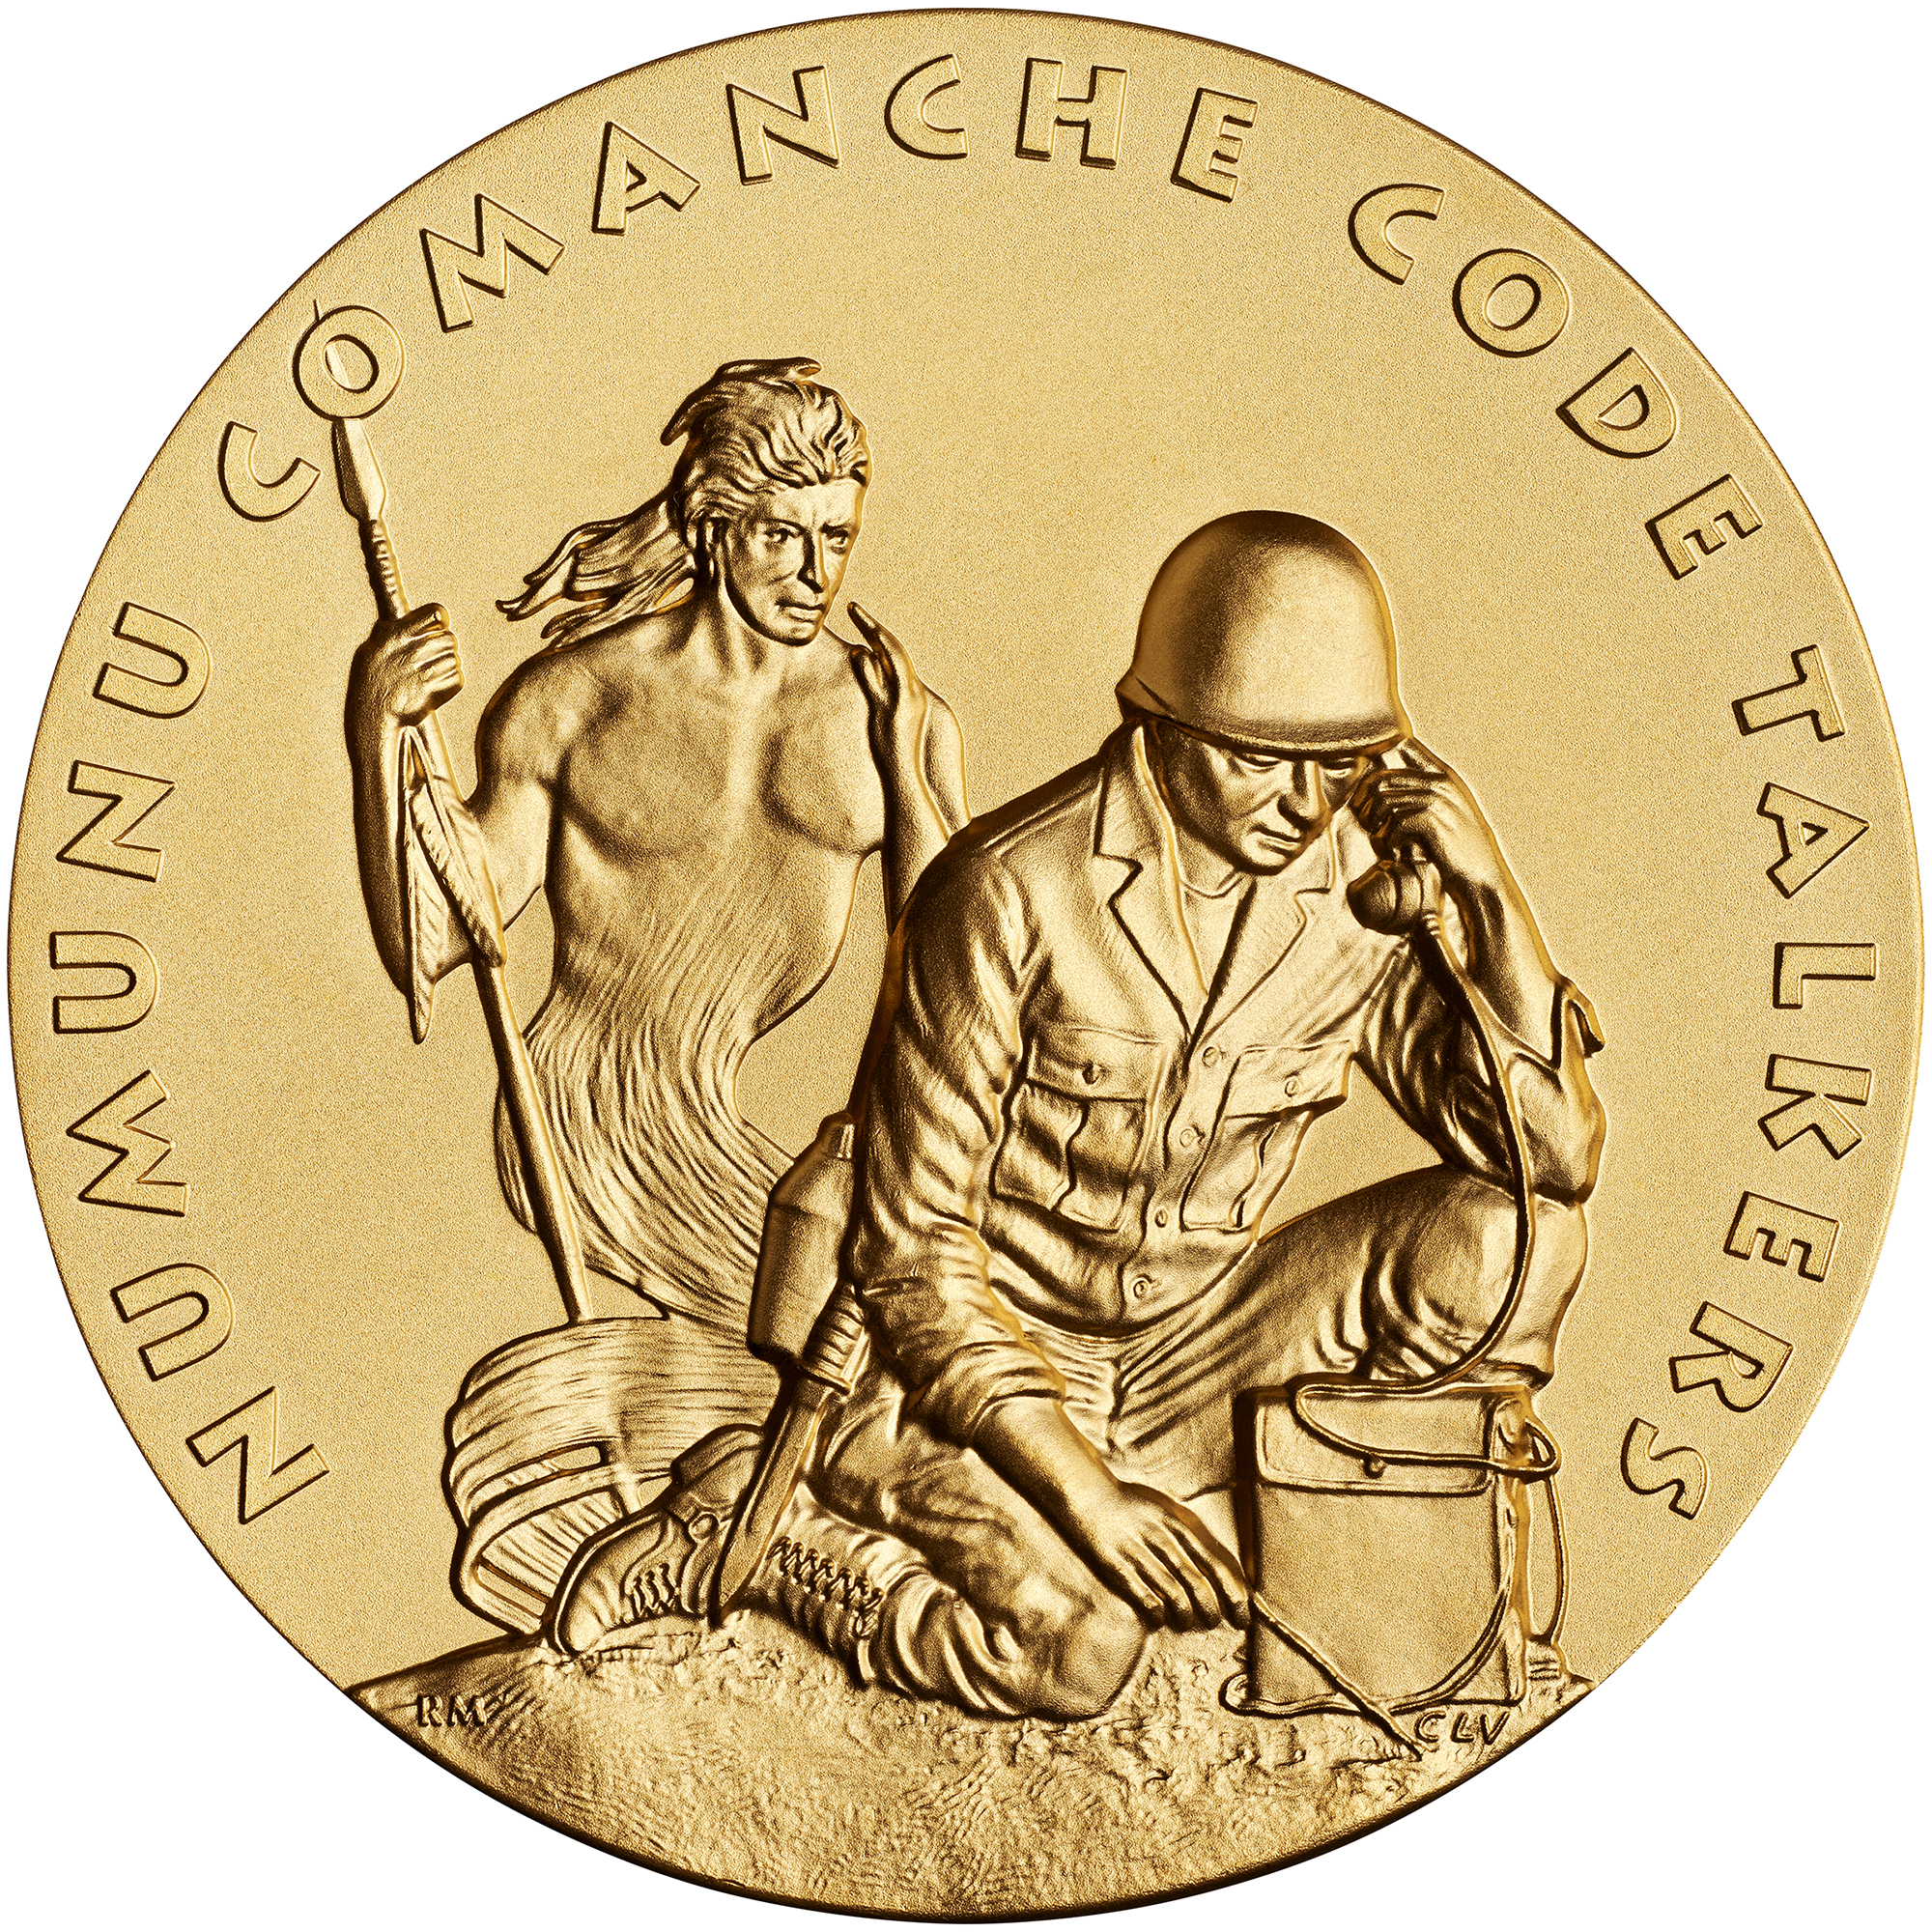 OSAGE NATION CODE TALKERS BRONZE MEDAL FROM US MINT